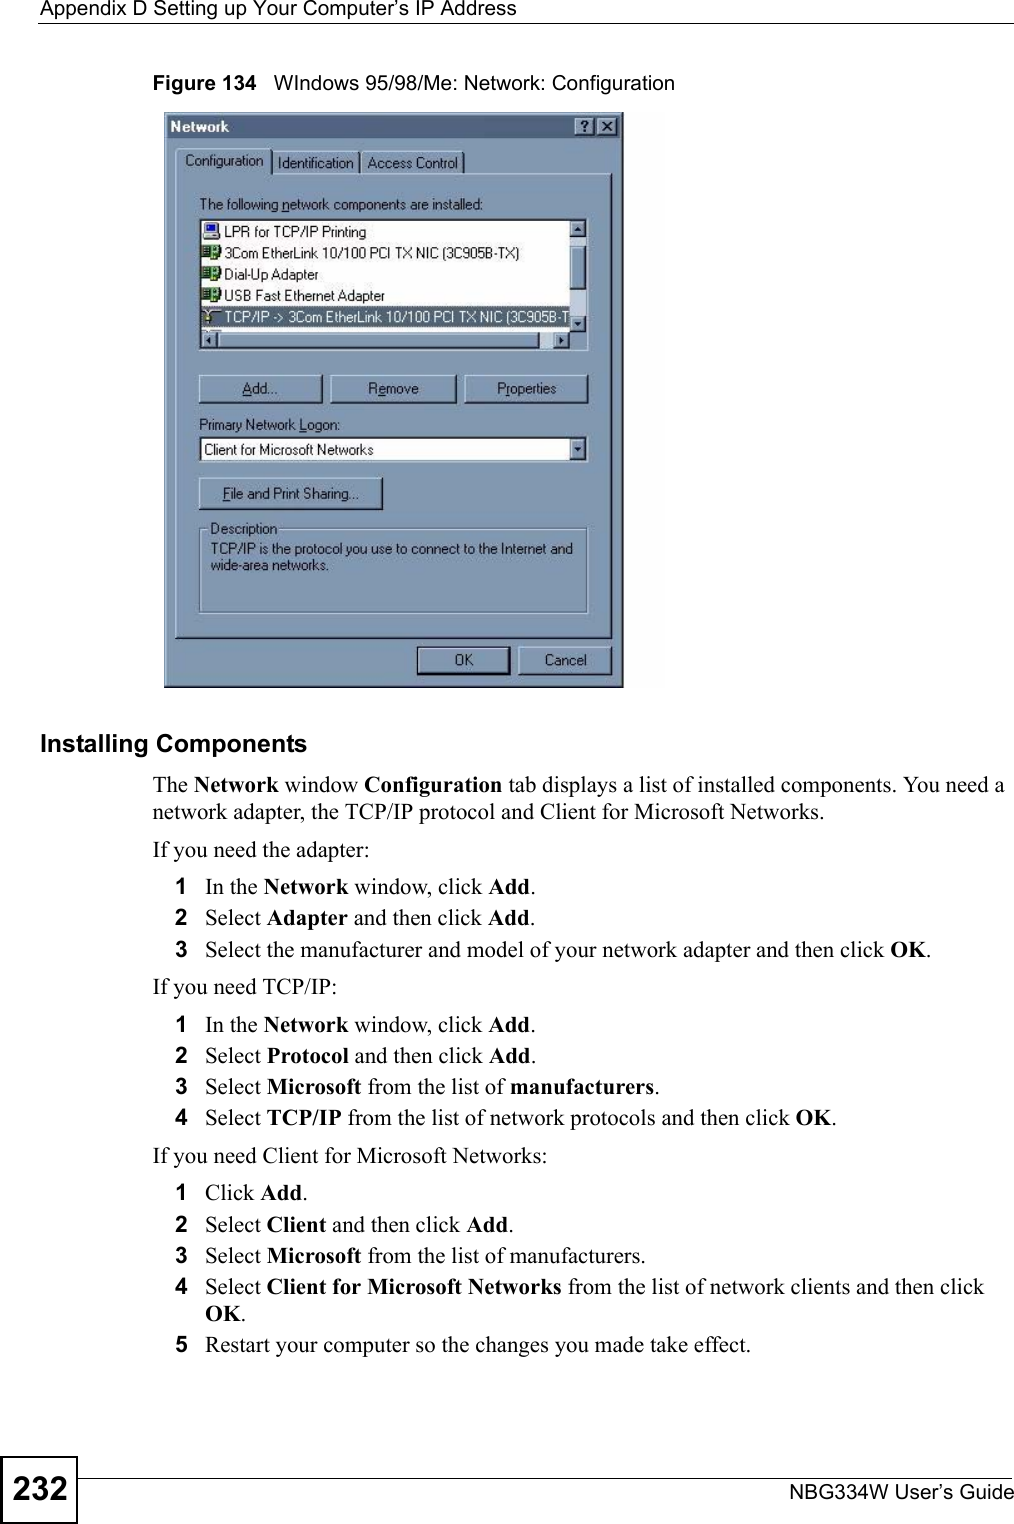 Appendix D Setting up Your Computer’s IP AddressNBG334W User’s Guide232Figure 134   WIndows 95/98/Me: Network: ConfigurationInstalling ComponentsThe Network window Configuration tab displays a list of installed components. You need a network adapter, the TCP/IP protocol and Client for Microsoft Networks.If you need the adapter:1In the Network window, click Add.2Select Adapter and then click Add.3Select the manufacturer and model of your network adapter and then click OK.If you need TCP/IP:1In the Network window, click Add.2Select Protocol and then click Add.3Select Microsoft from the list of manufacturers.4Select TCP/IP from the list of network protocols and then click OK.If you need Client for Microsoft Networks:1Click Add.2Select Client and then click Add.3Select Microsoft from the list of manufacturers.4Select Client for Microsoft Networks from the list of network clients and then click OK.5Restart your computer so the changes you made take effect.